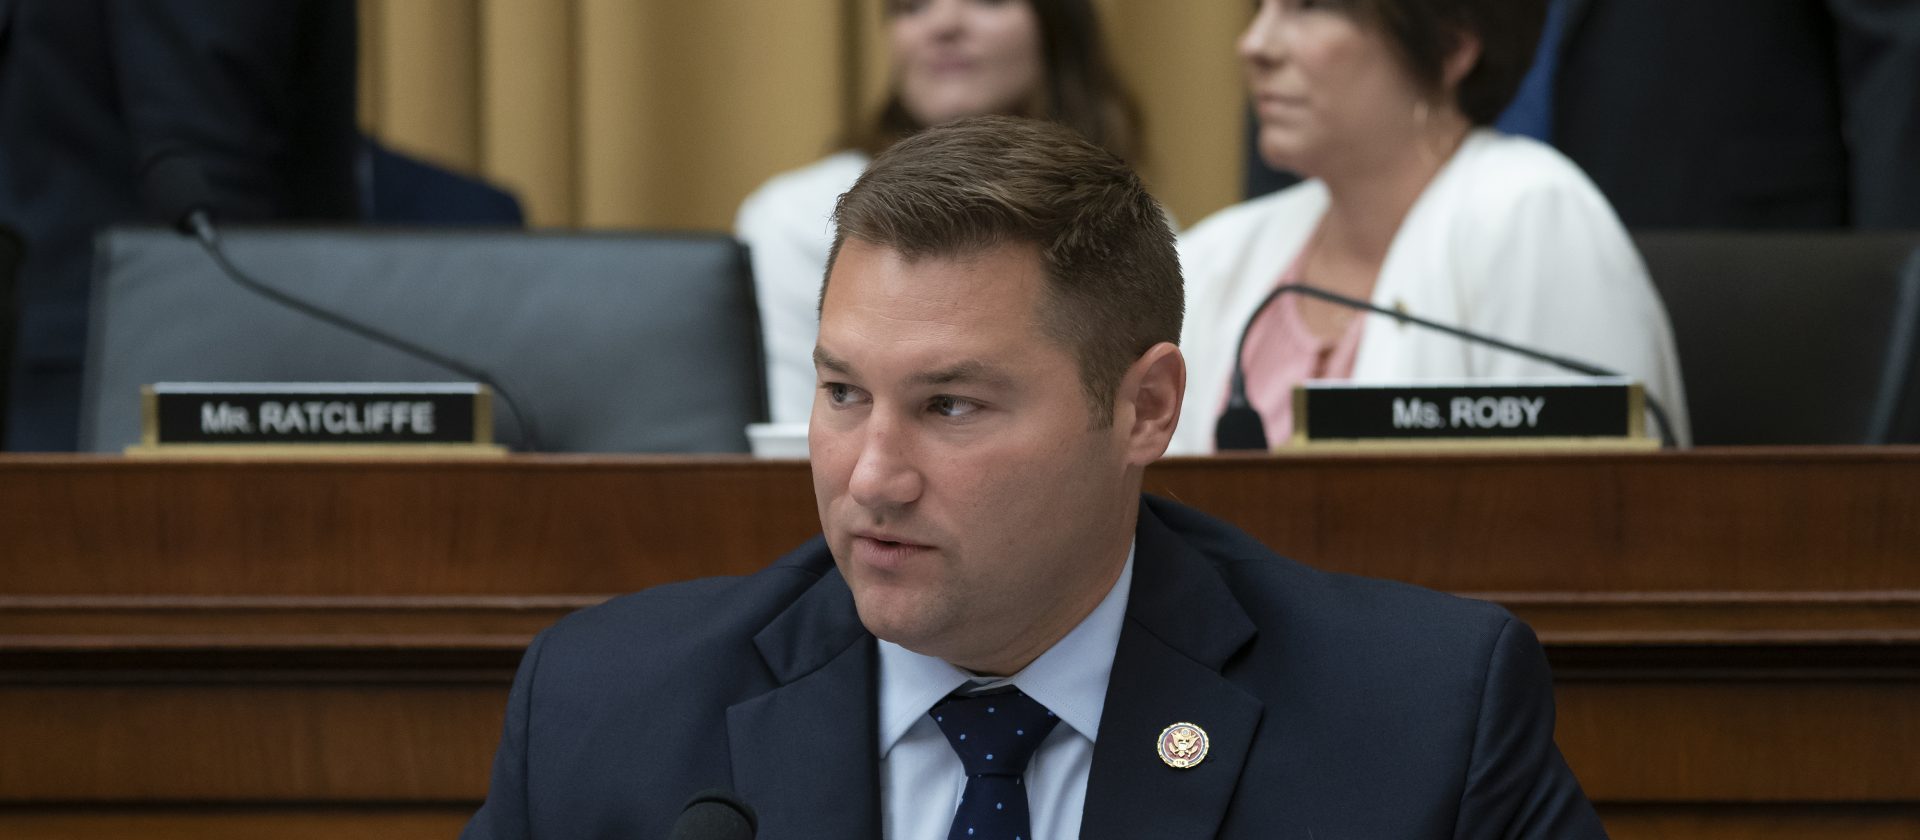 Rep. Guy Reschenthaler, R-Pa., speaks during a House Judiciary Committee session on Capitol Hill in Washington, July 24, 2019.